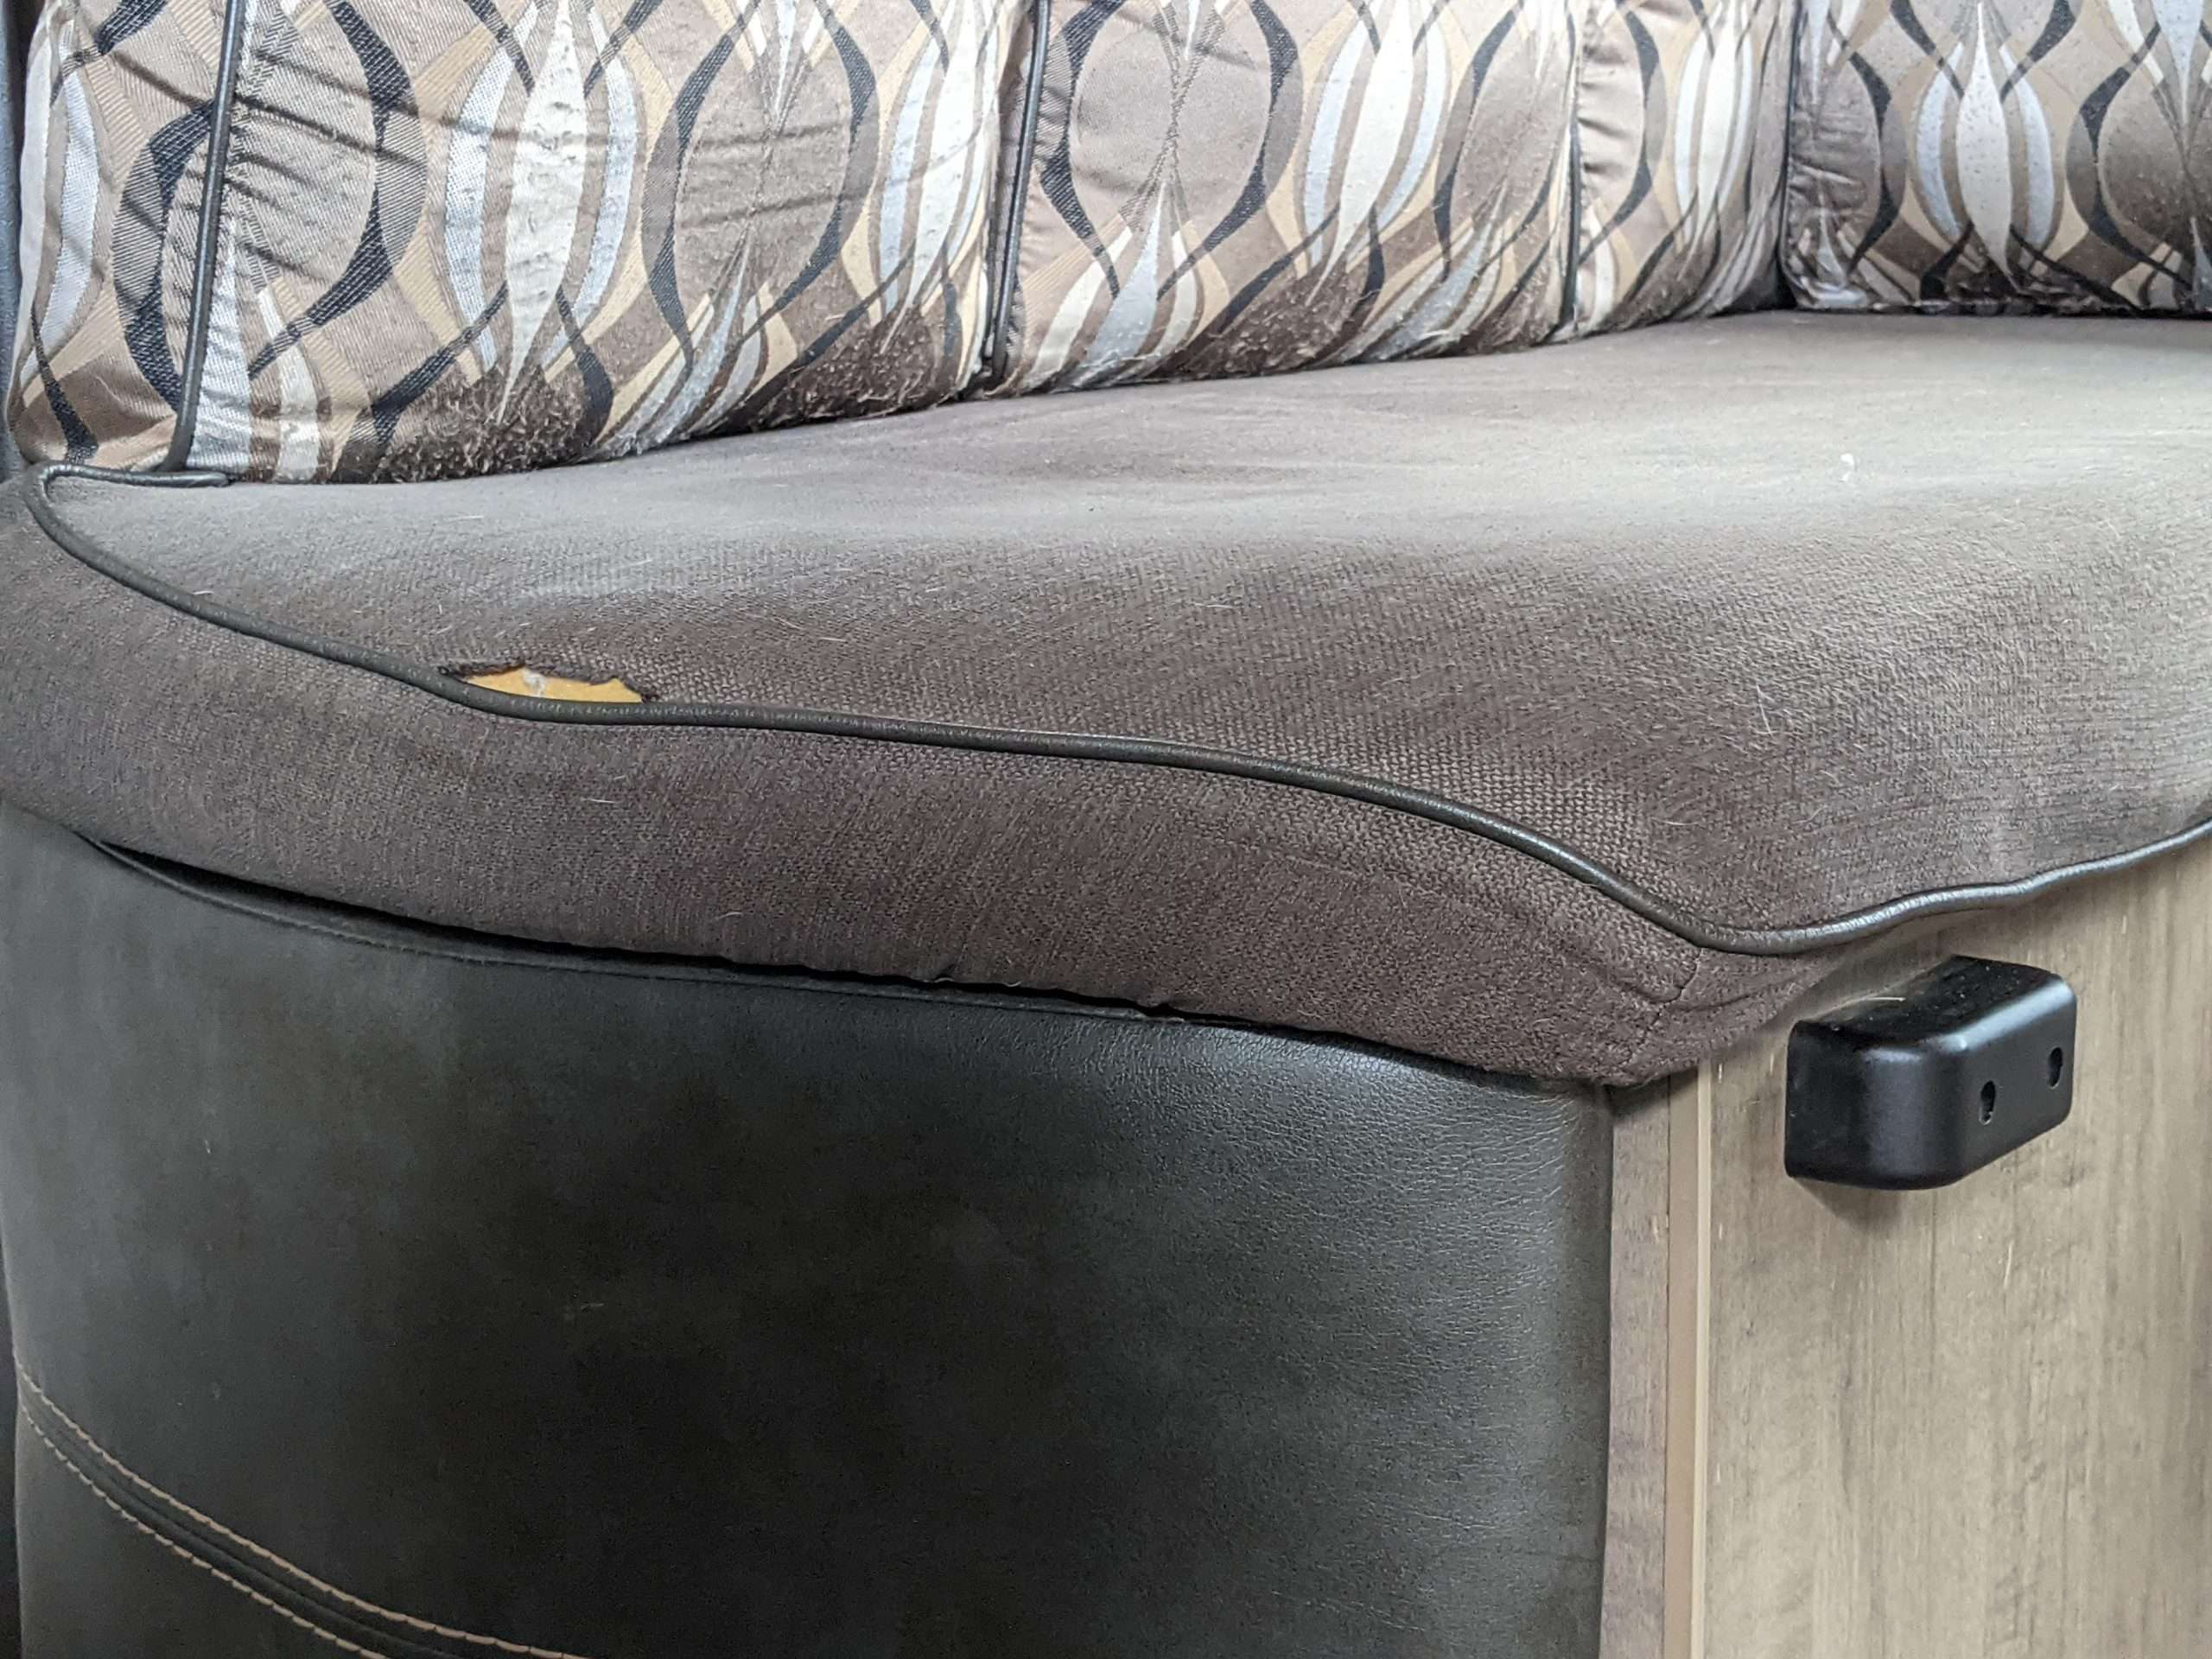 How to Replace Worn-out Camper Cushions